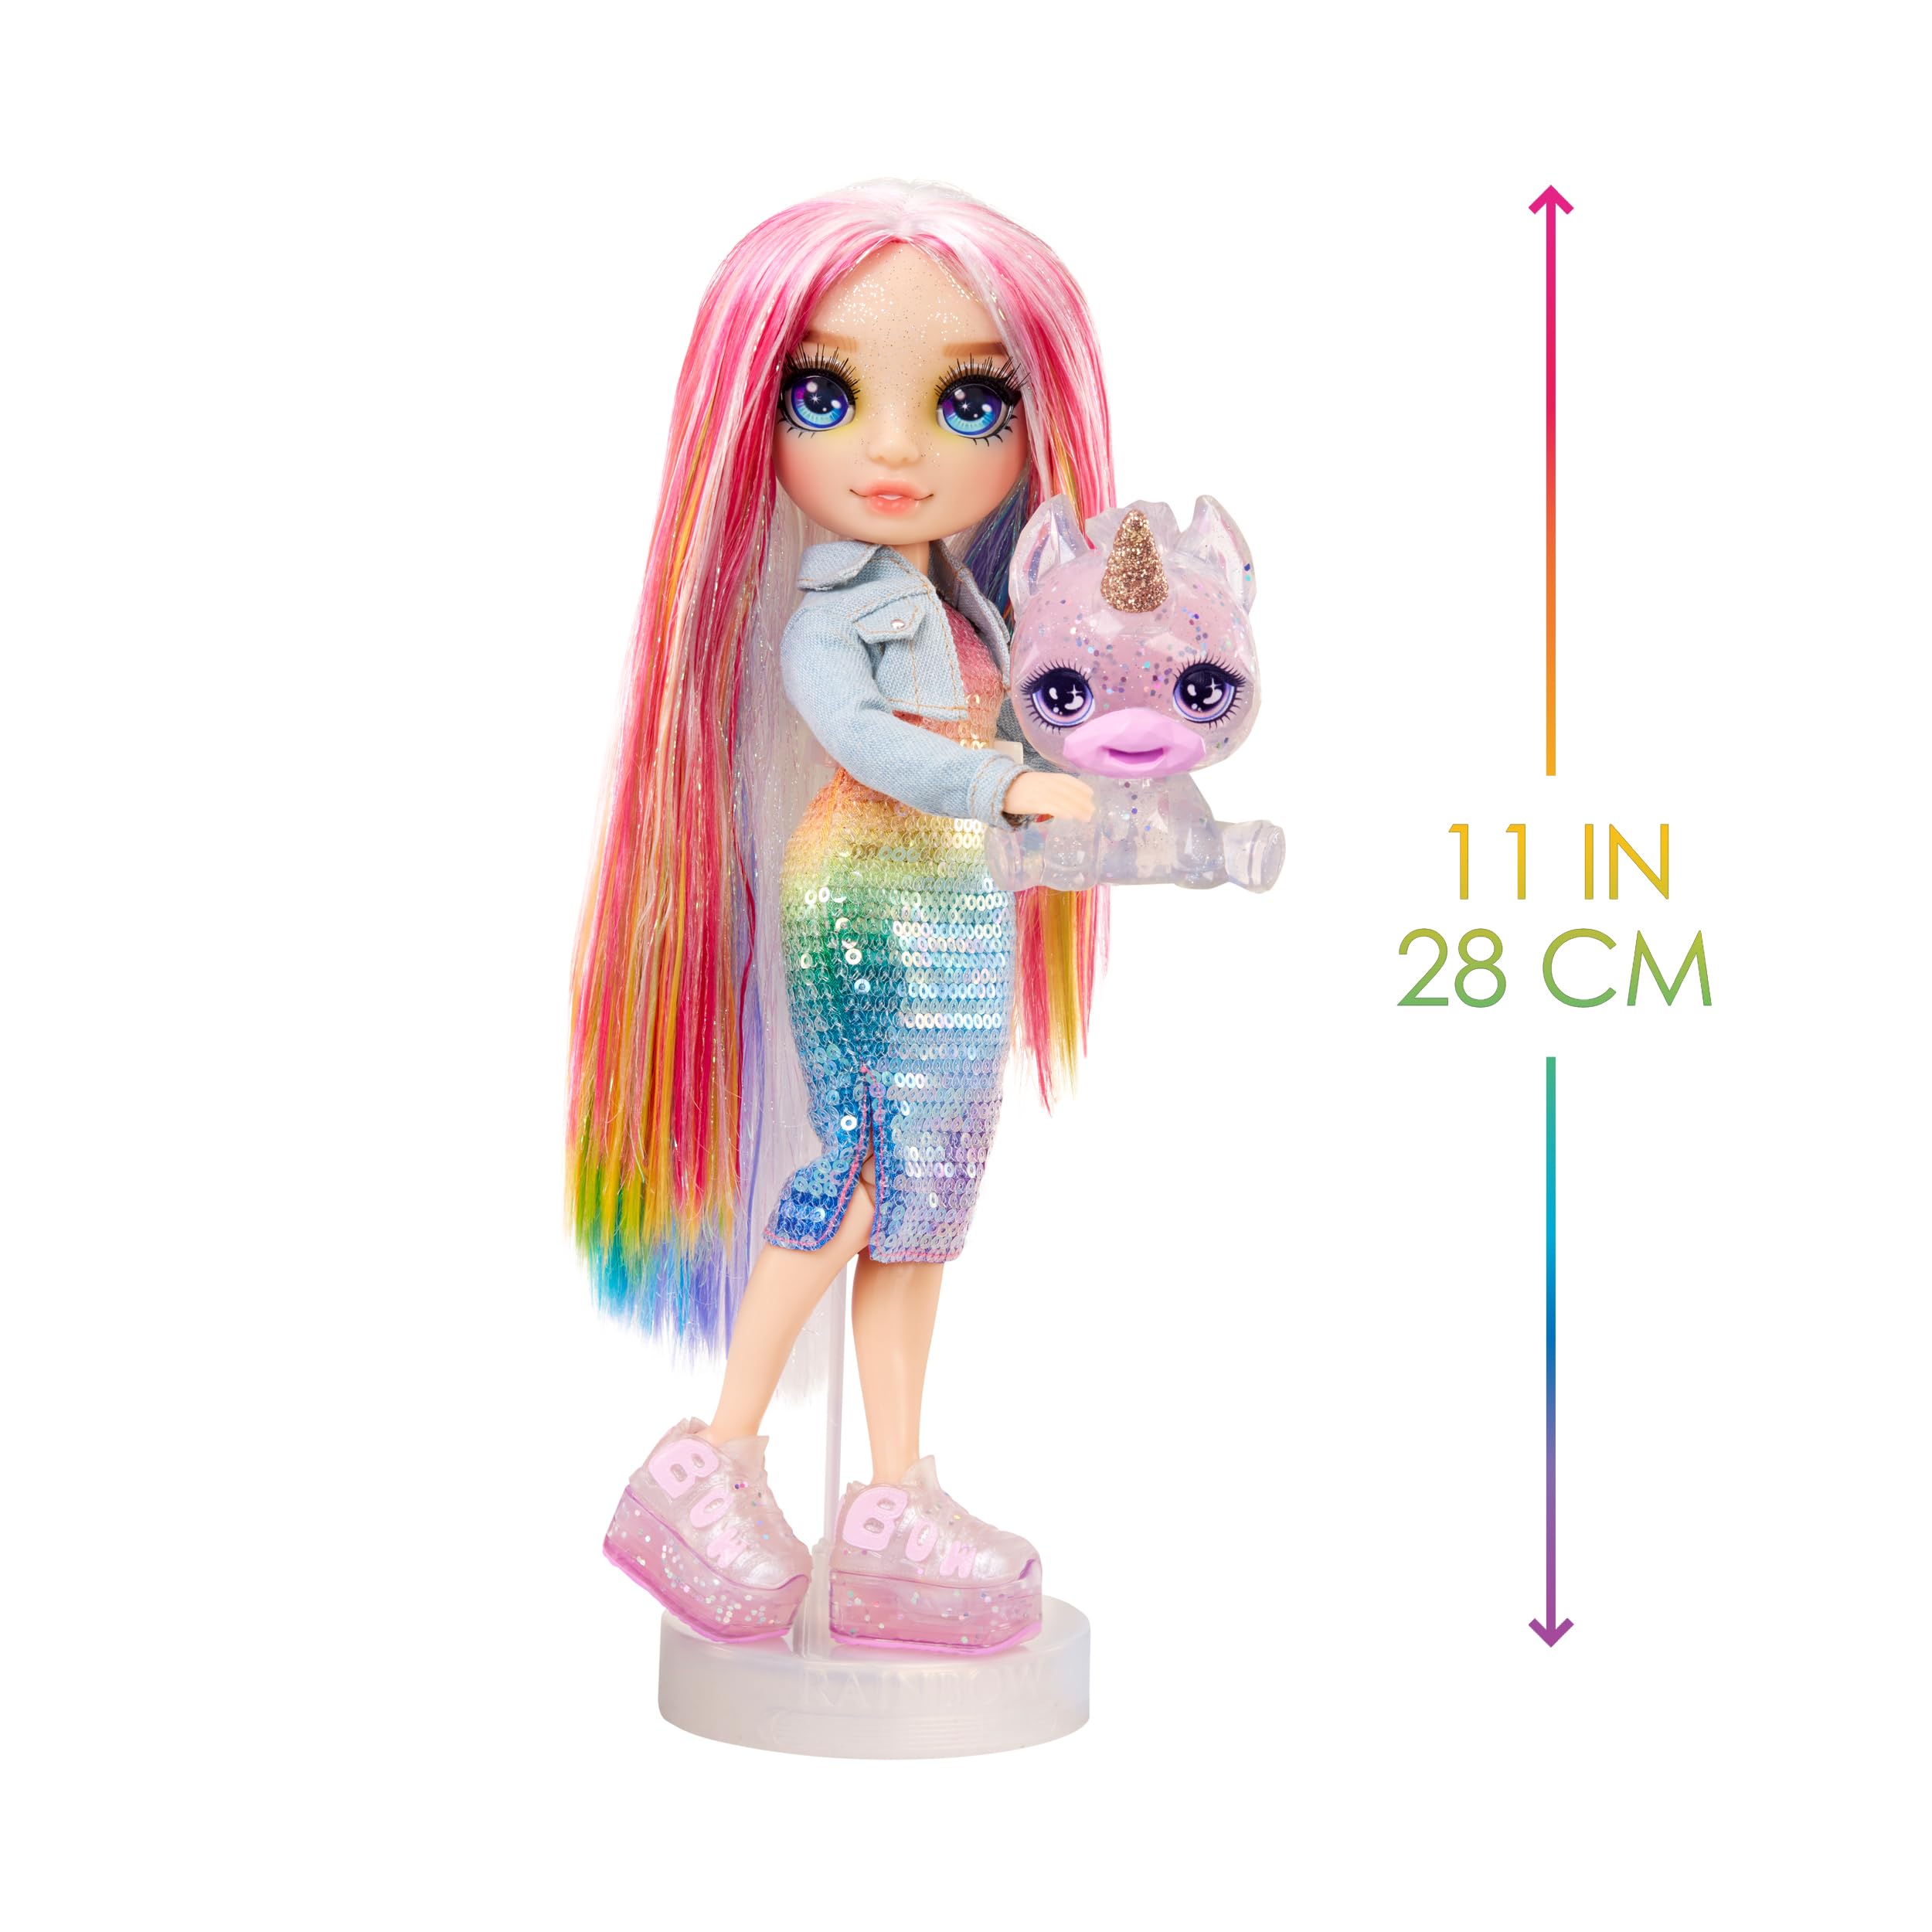 Rainbow High Amaya (Rainbow) with Slime Kit & Pet - Rainbow 11” Shimmer Doll with DIY Sparkle Slime, Magical Yeti Pet and Fashion Accessories, Kids Gift 4-12 Years